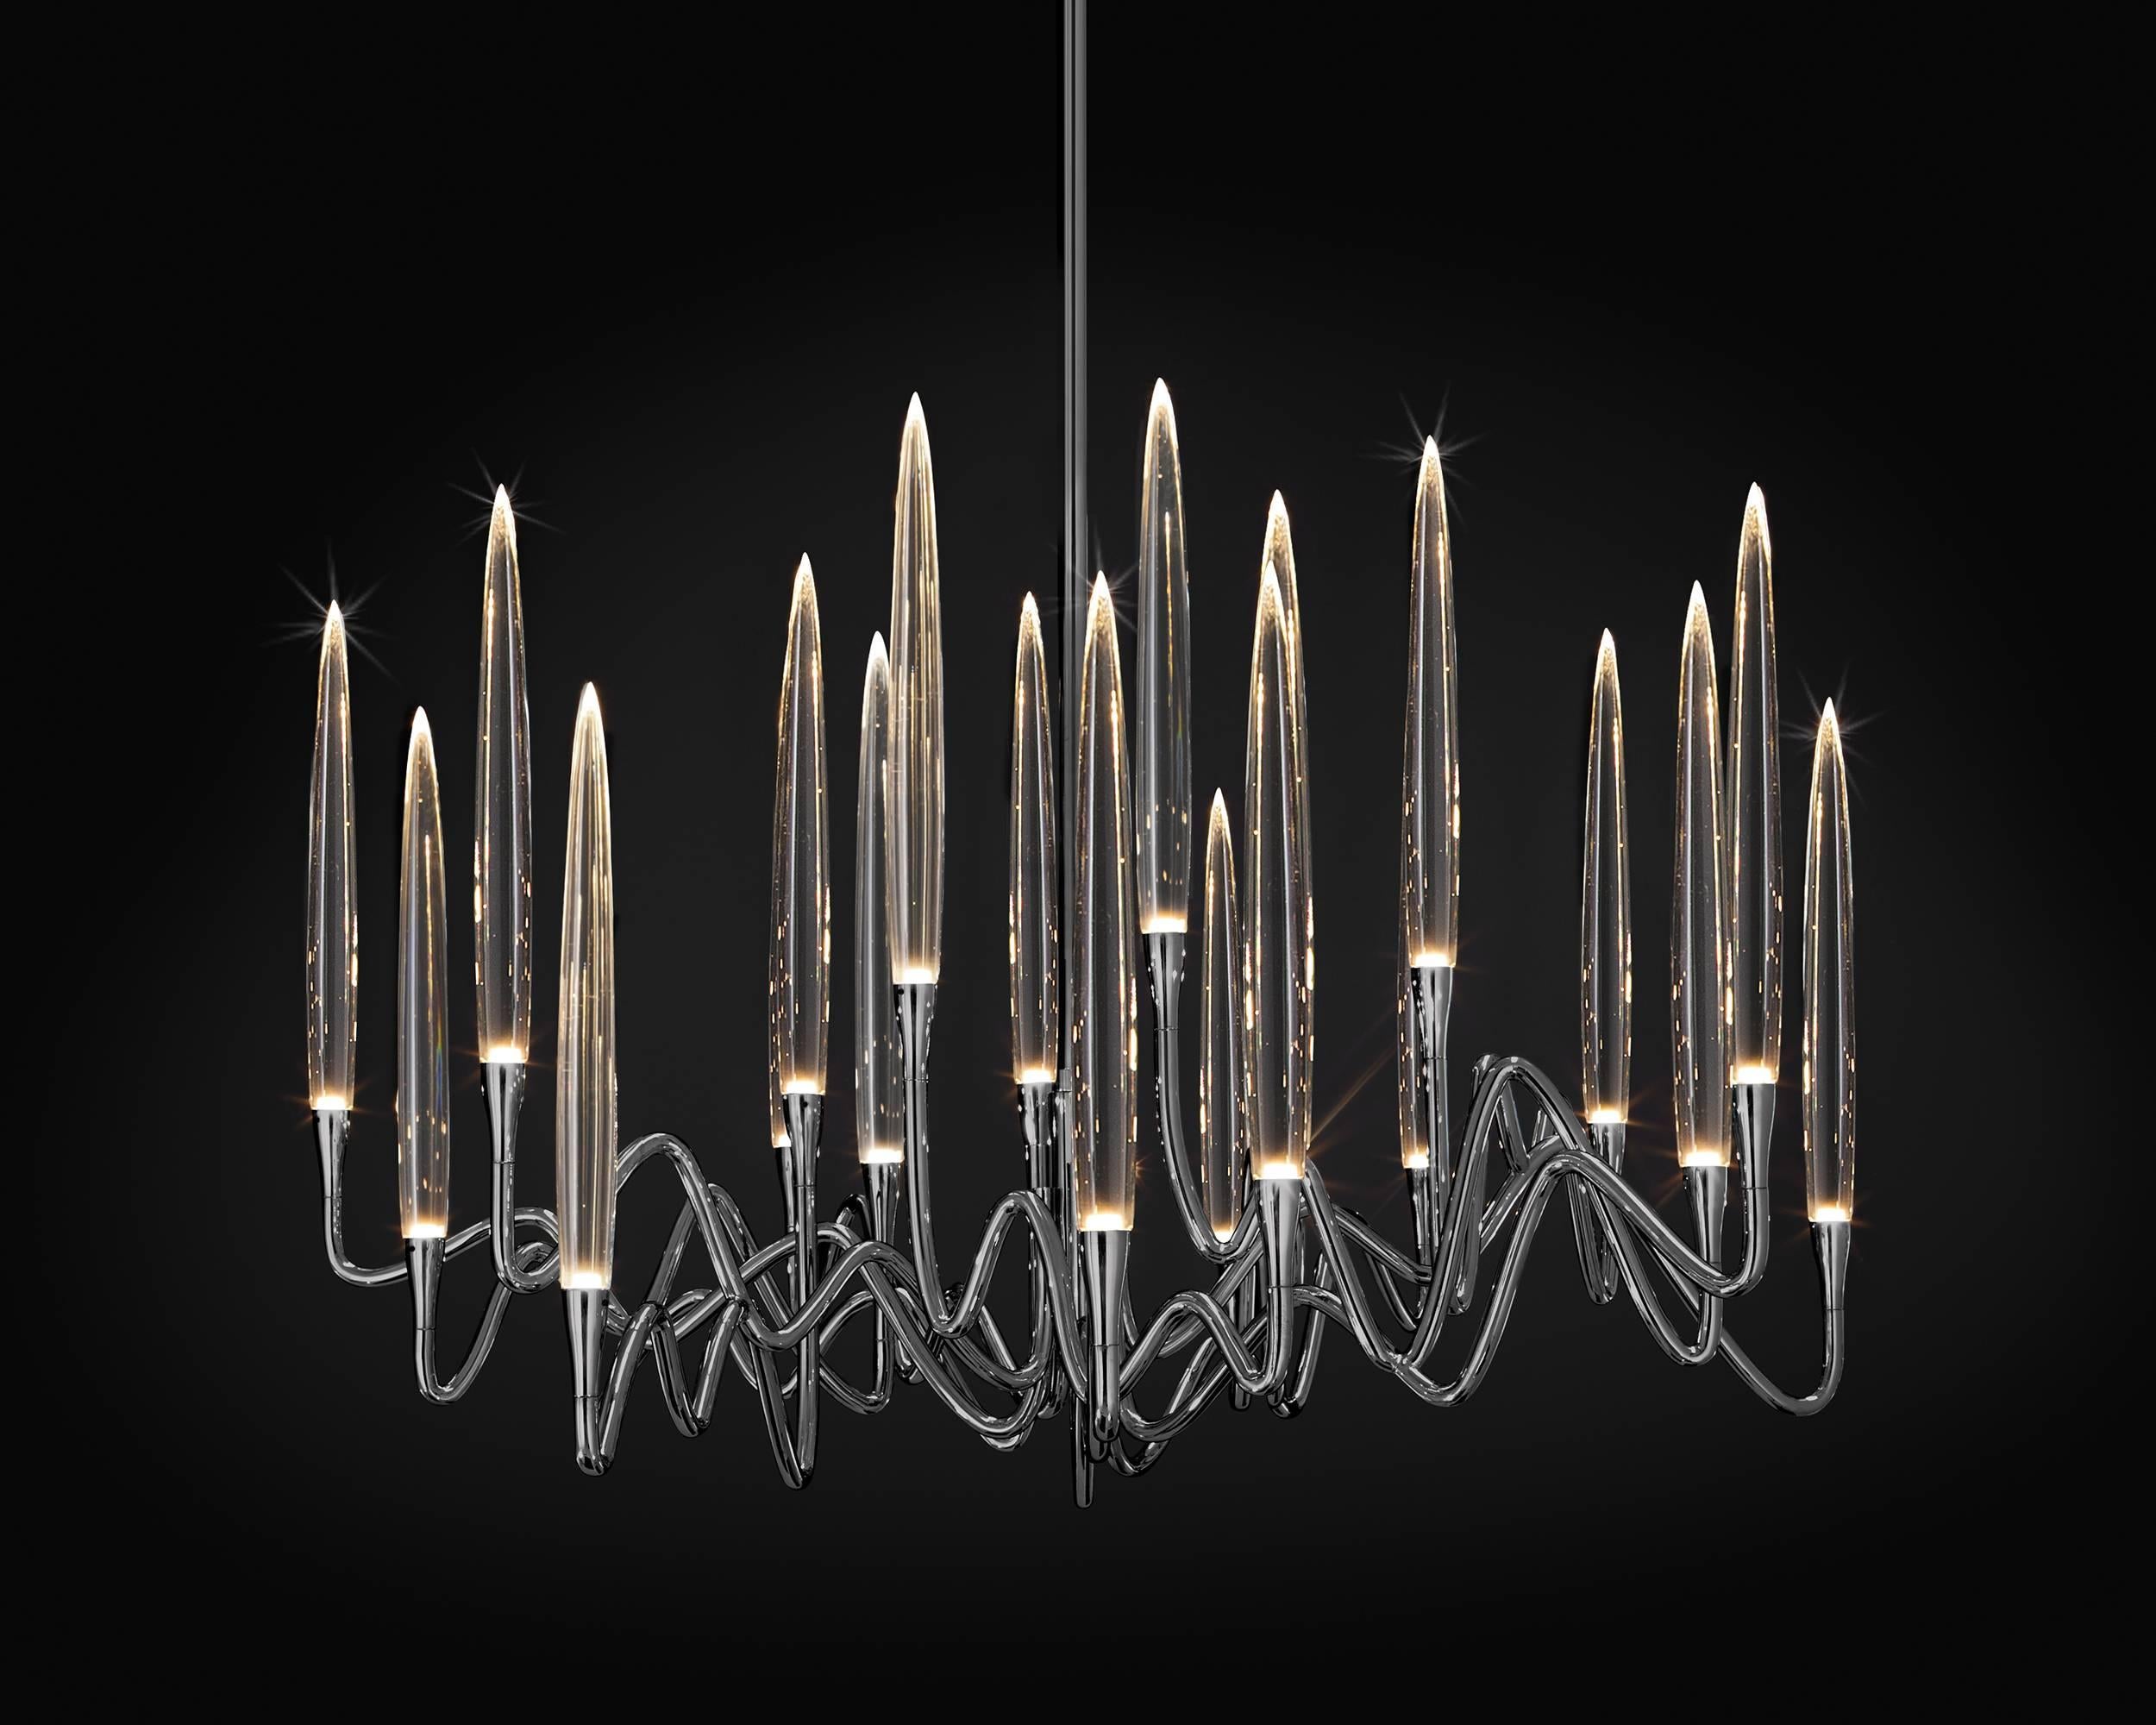 Inspired by Arabic calligraphic art and the icon of the classical candelabrum is Il Pezzo 3 Chandelier, with a hand-forged brass structure and elegant “candles” crafted from solid crystal.
The candles are illuminated using the latest LED technology,